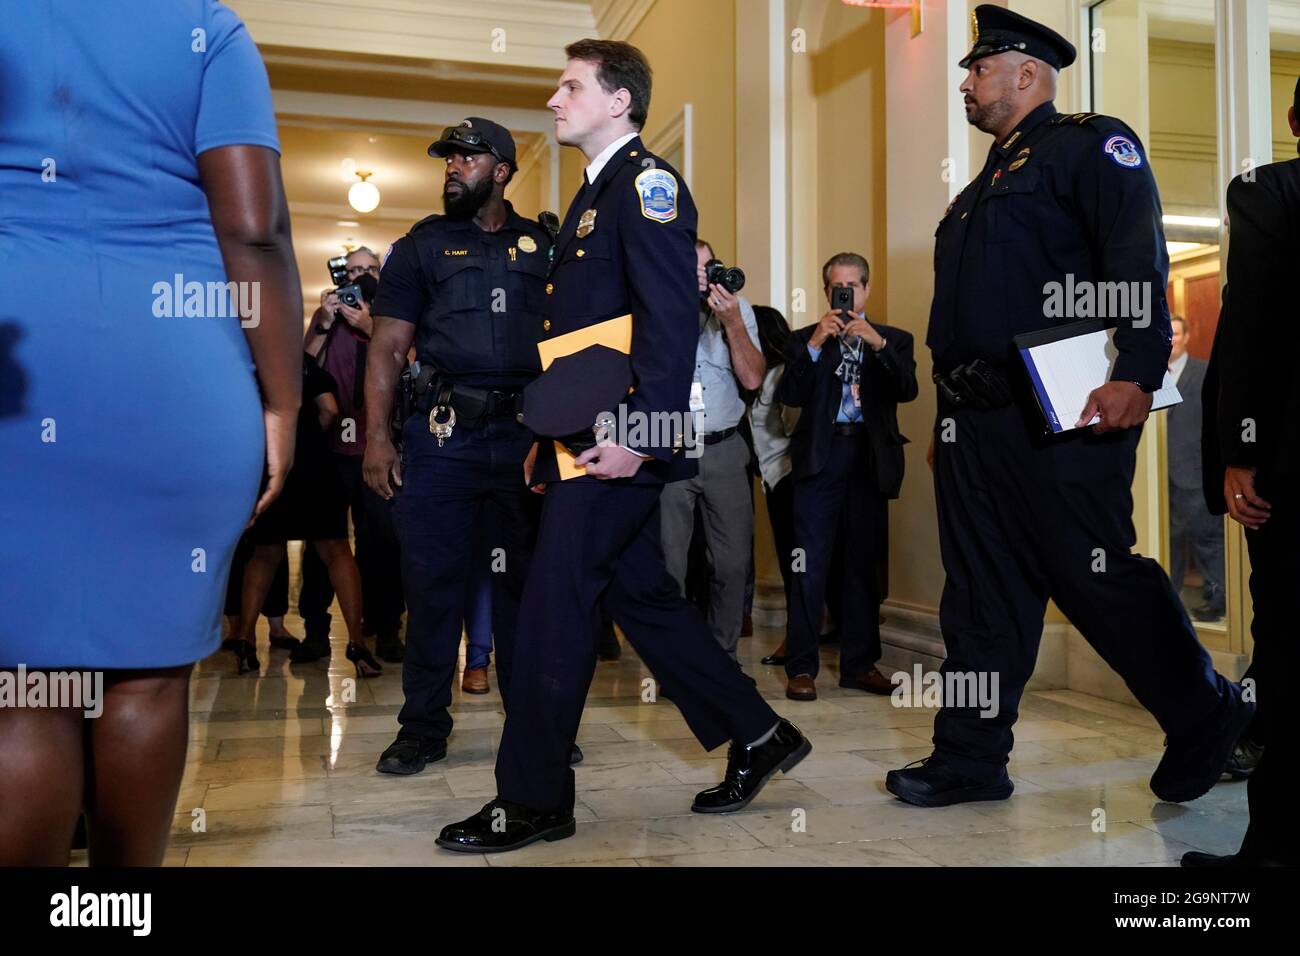 DC Metropolitan police officer Daniel Hodges and Private First Class Harry Dunn of the US Capitol Police arrives before the opening hearing of the House (Select) Committee on the Investigation of the January 6th Attack on the U.S. Capitol, on Capitol Hill in Washington, U.S., July 27, 2021.  REUTERS/Joshua Roberts Stock Photo